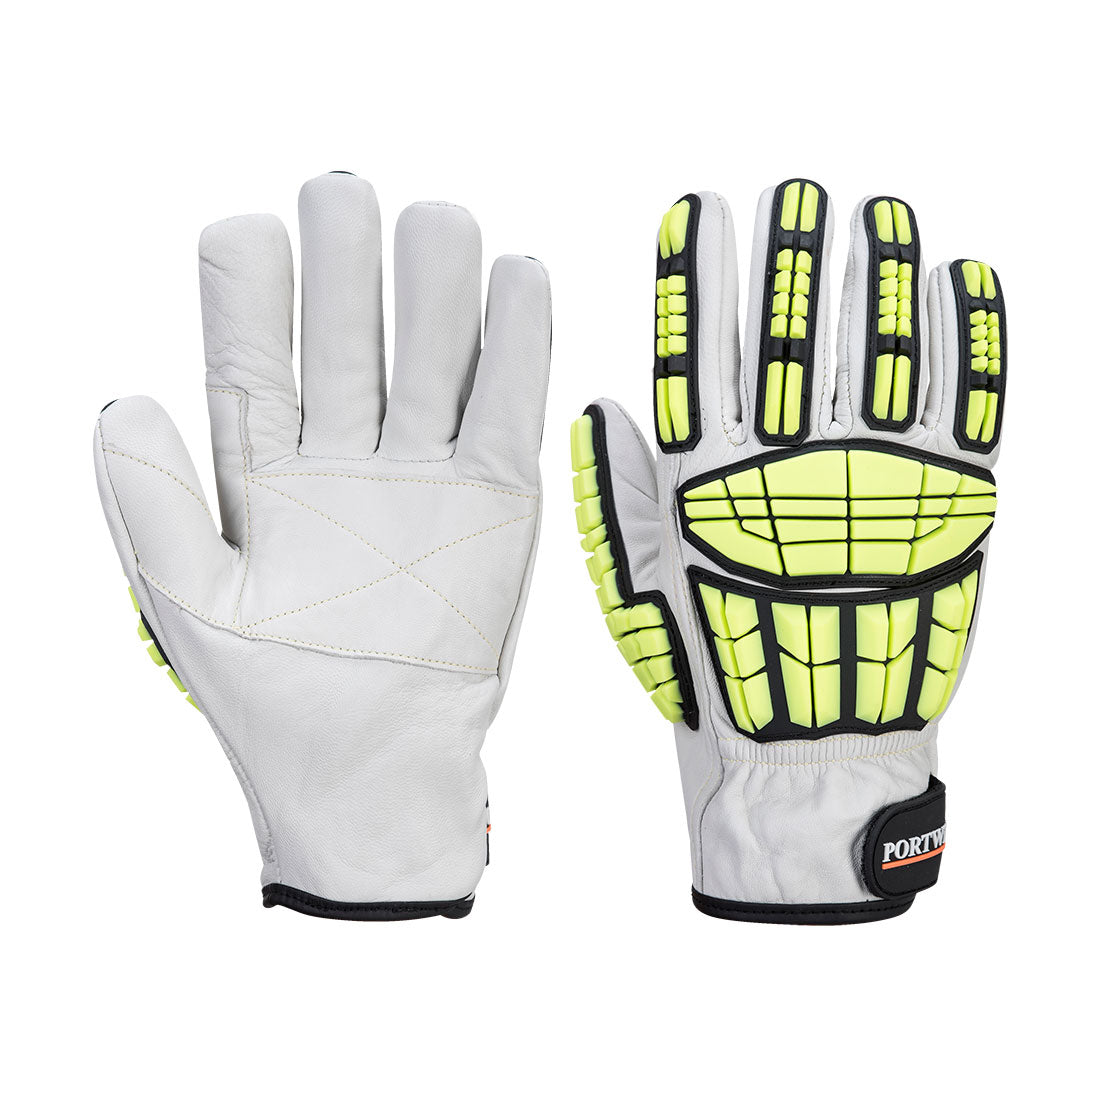 Portwest A745 Impact Pro Cut Glove for Impact protection